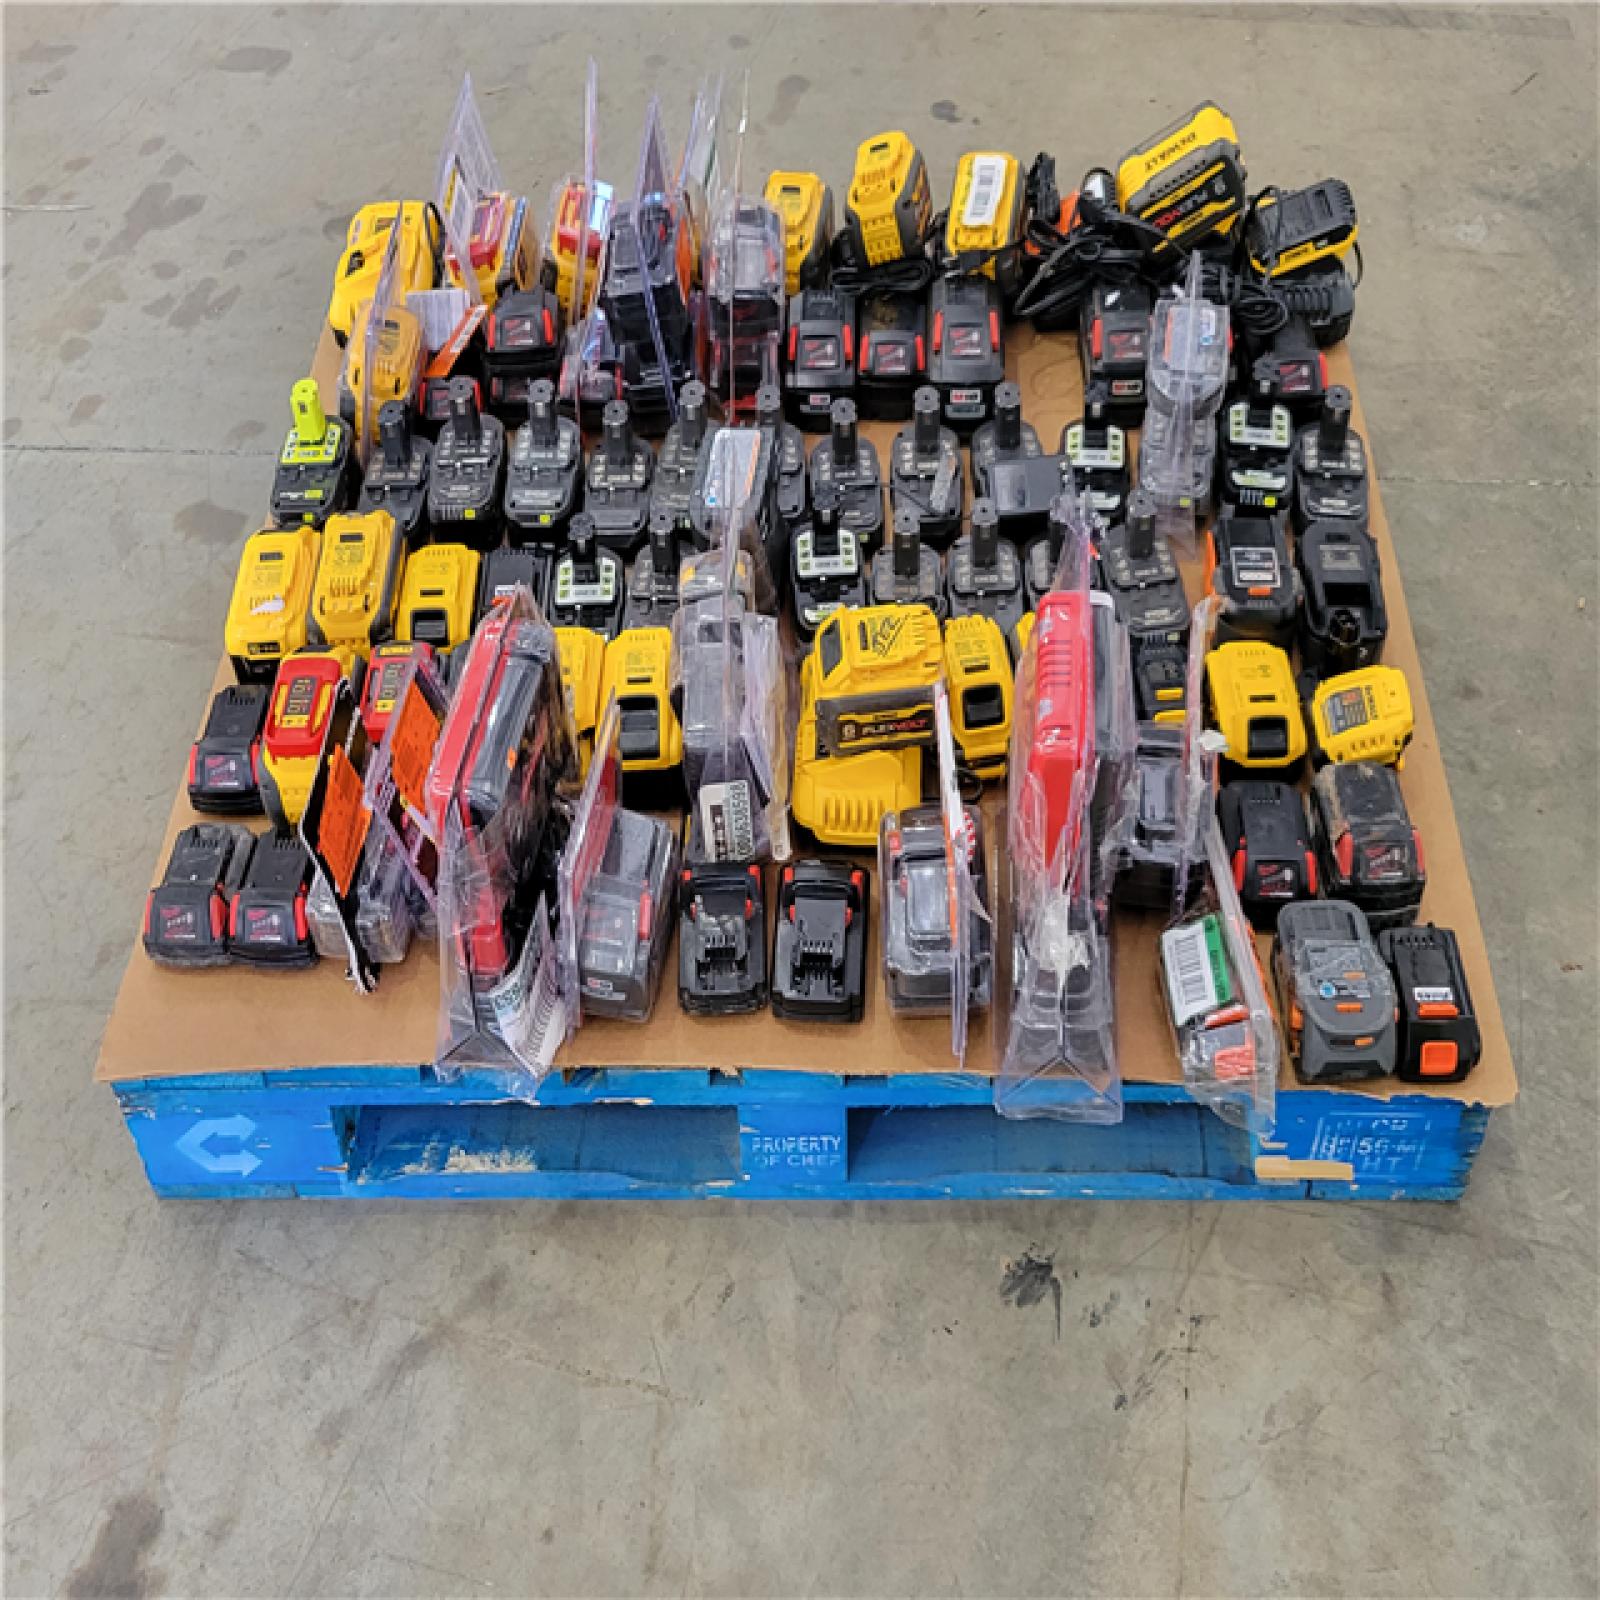 Houston Location - AS-IS Battery Pallet